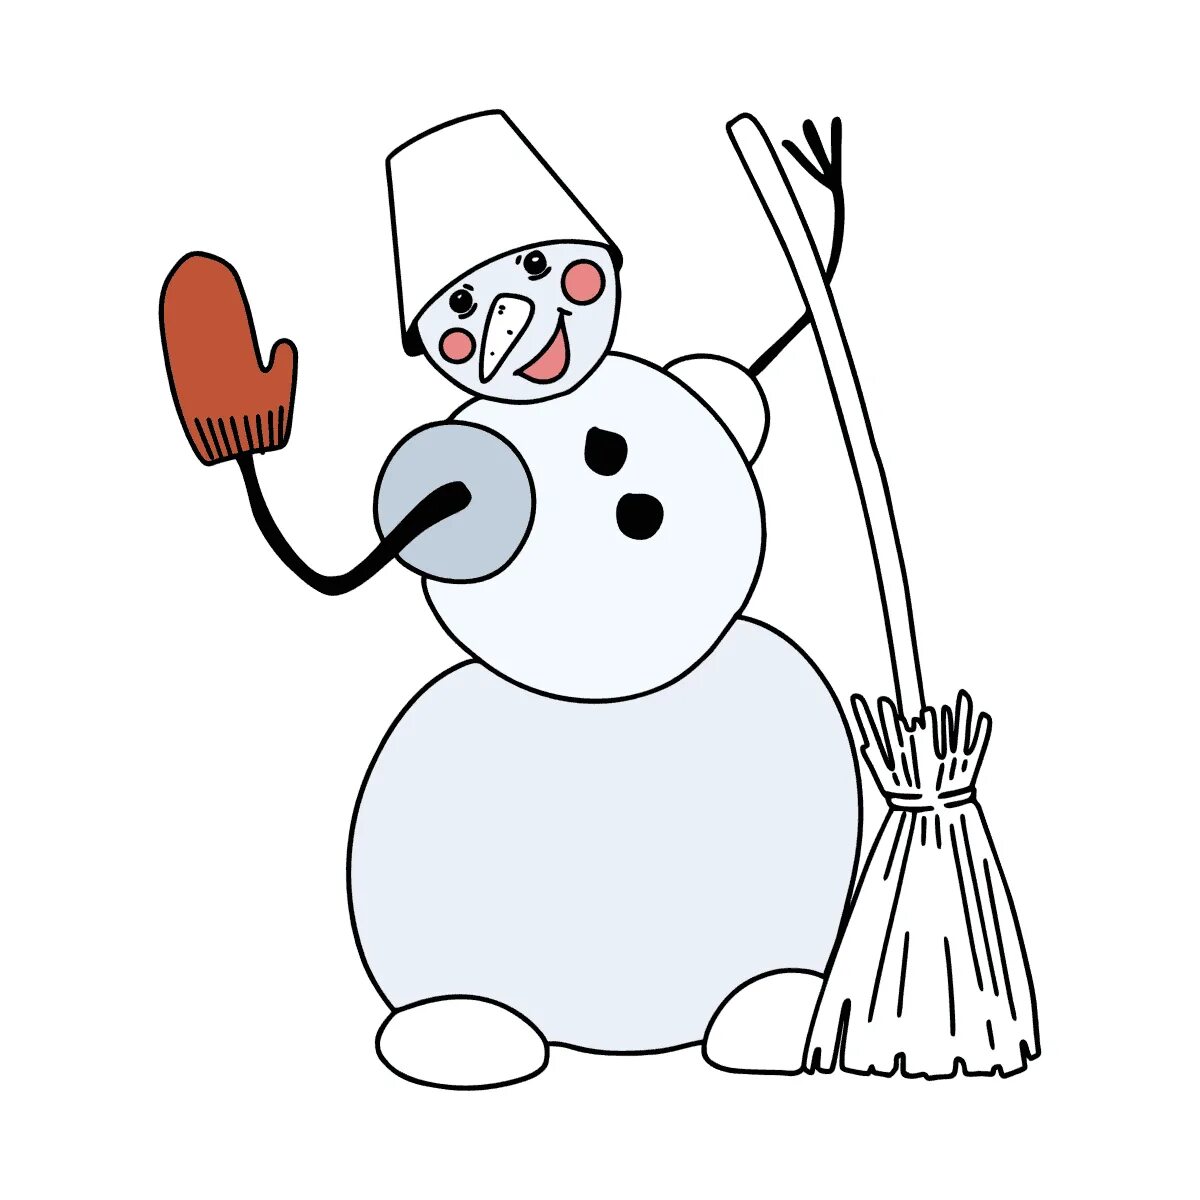 Snowman with broom #1